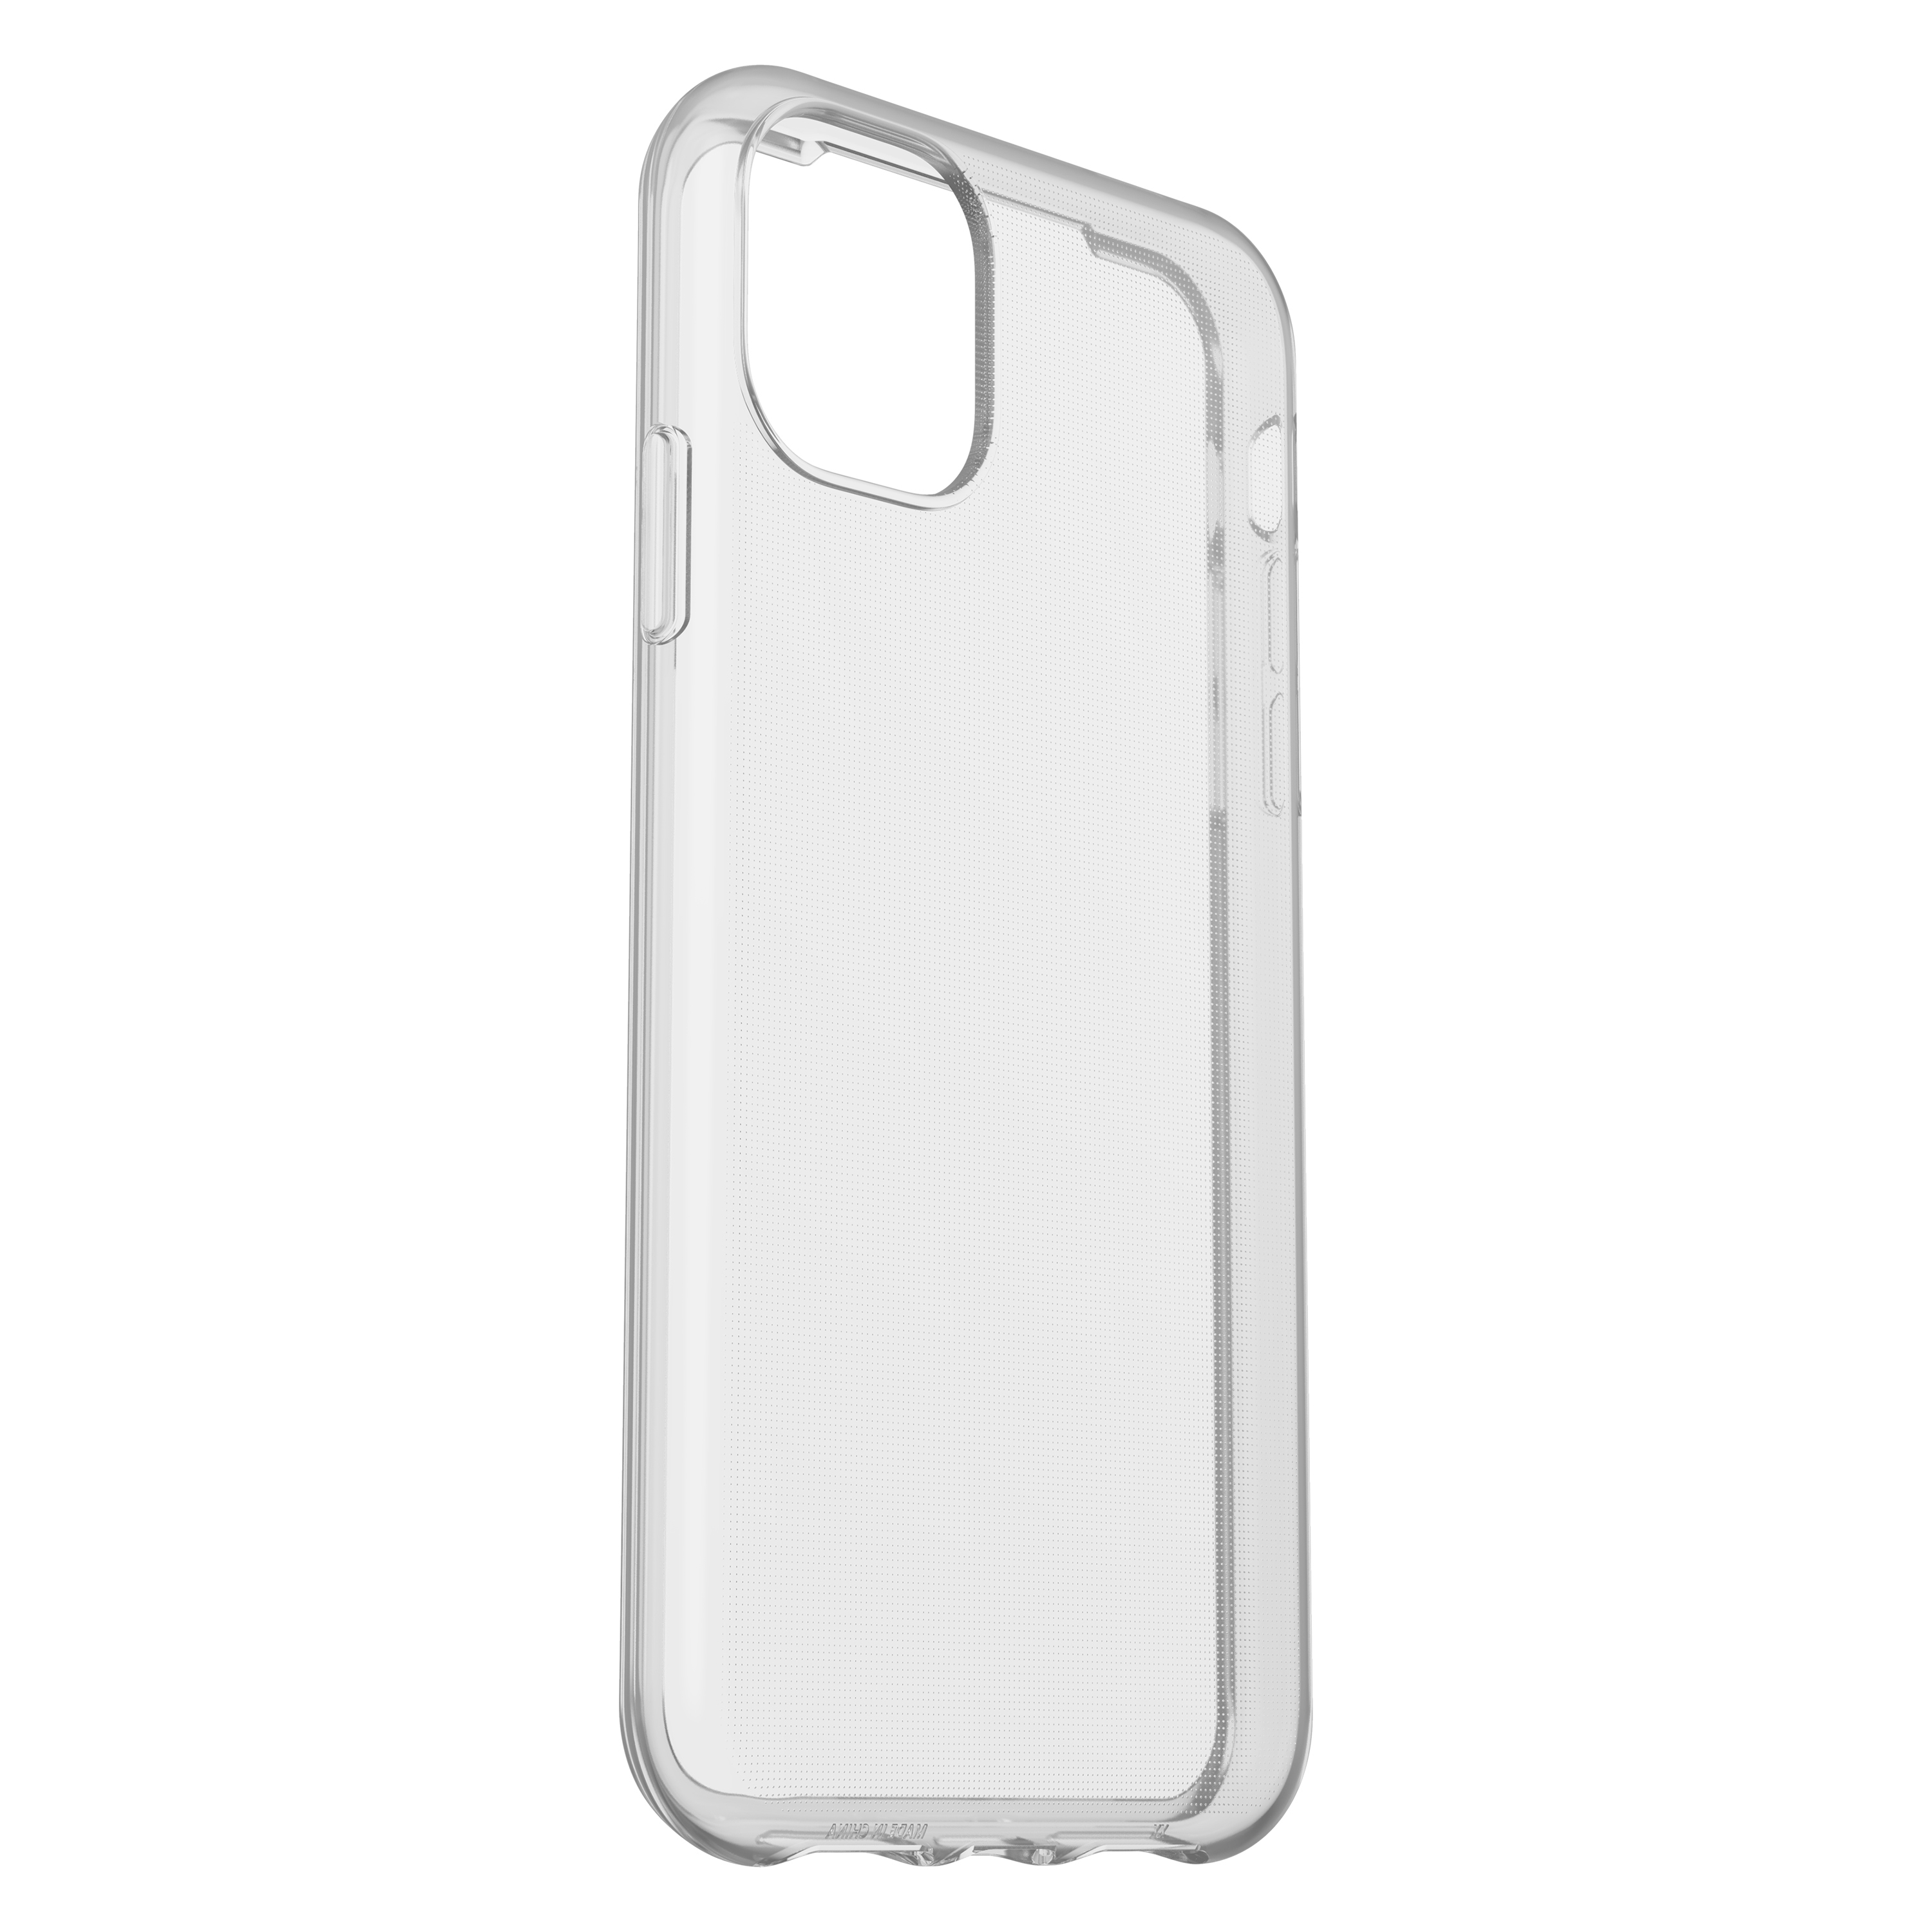 OTTERBOX Clearly Protected Skin, Apple, Backcover, iPhone Transparent 11